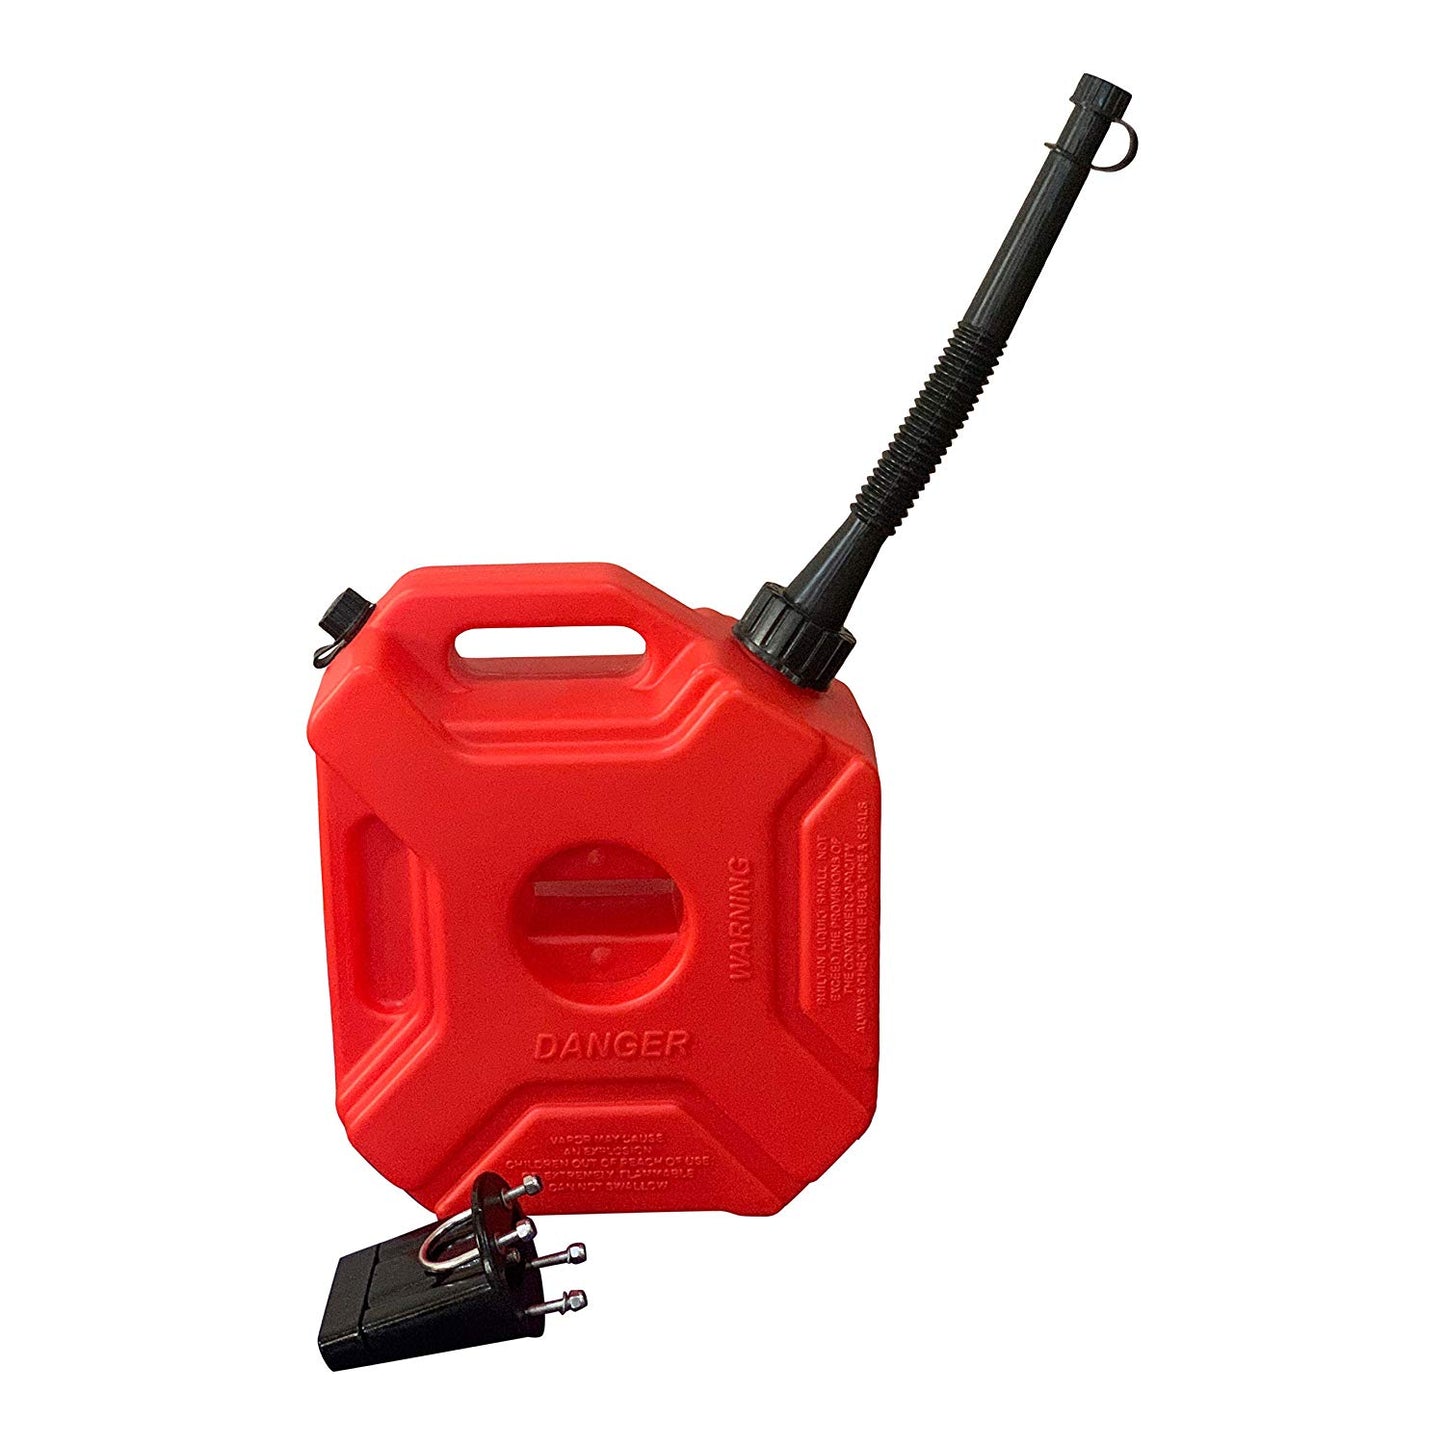 1.3 Gallon Gas Can with Car Mount and Two Spout (Black and White) - Red (5 L) 34.99 freeshipping - Kool Products